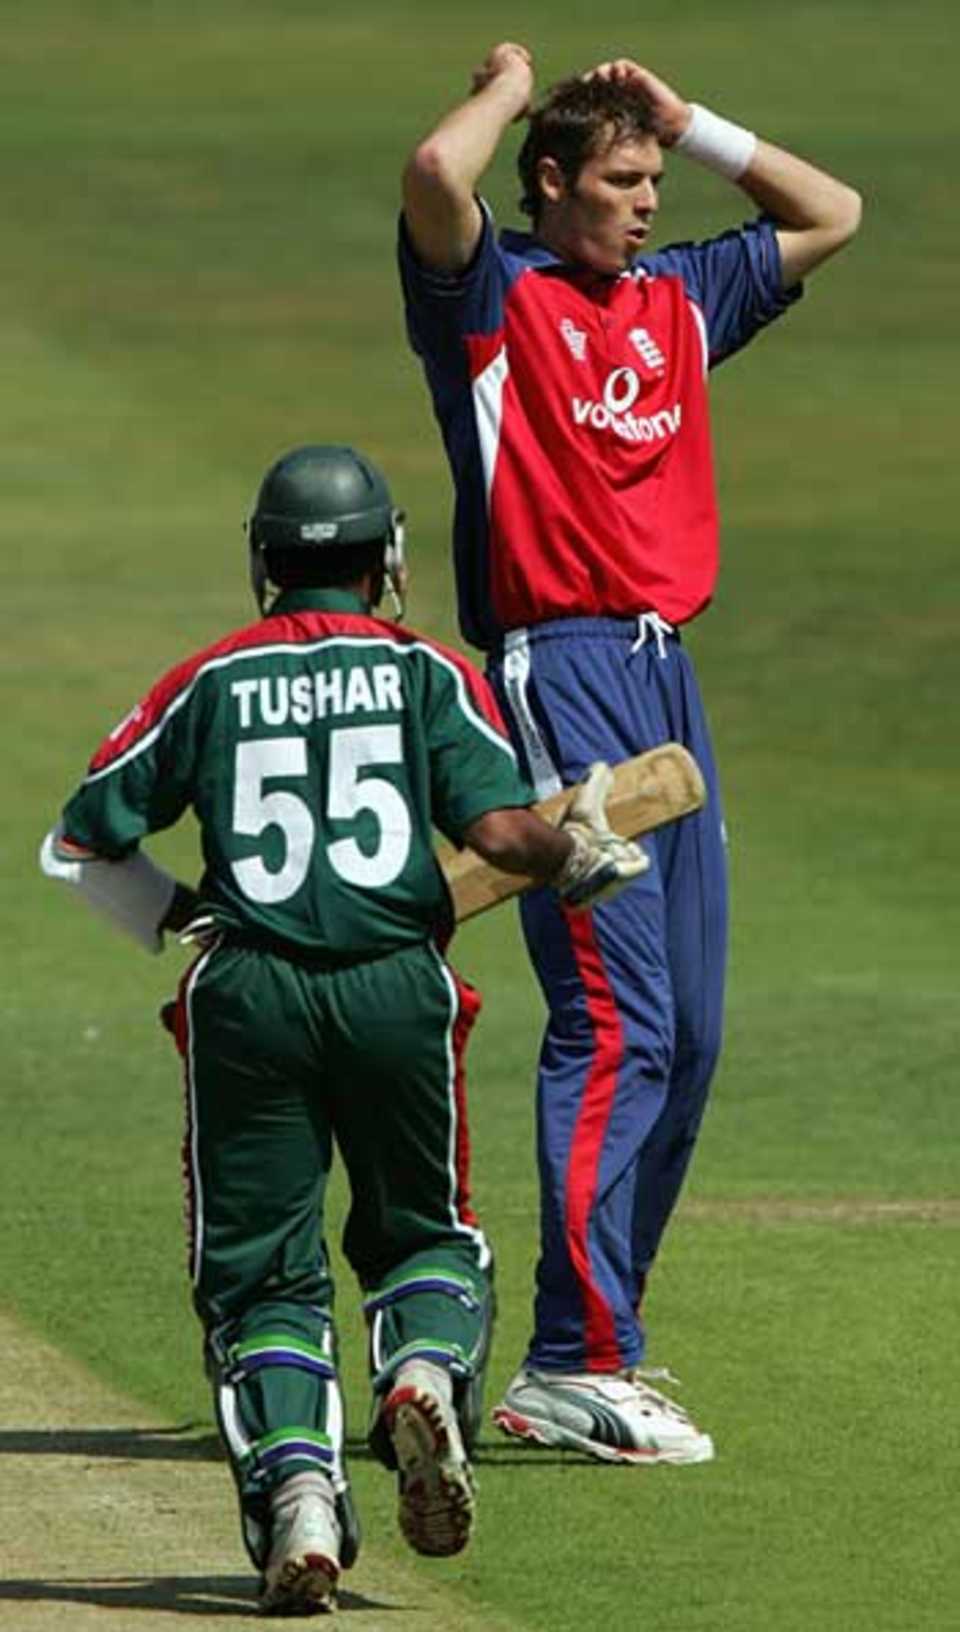 Chris Tremlett with hands on head after Tushar Imran is dropped